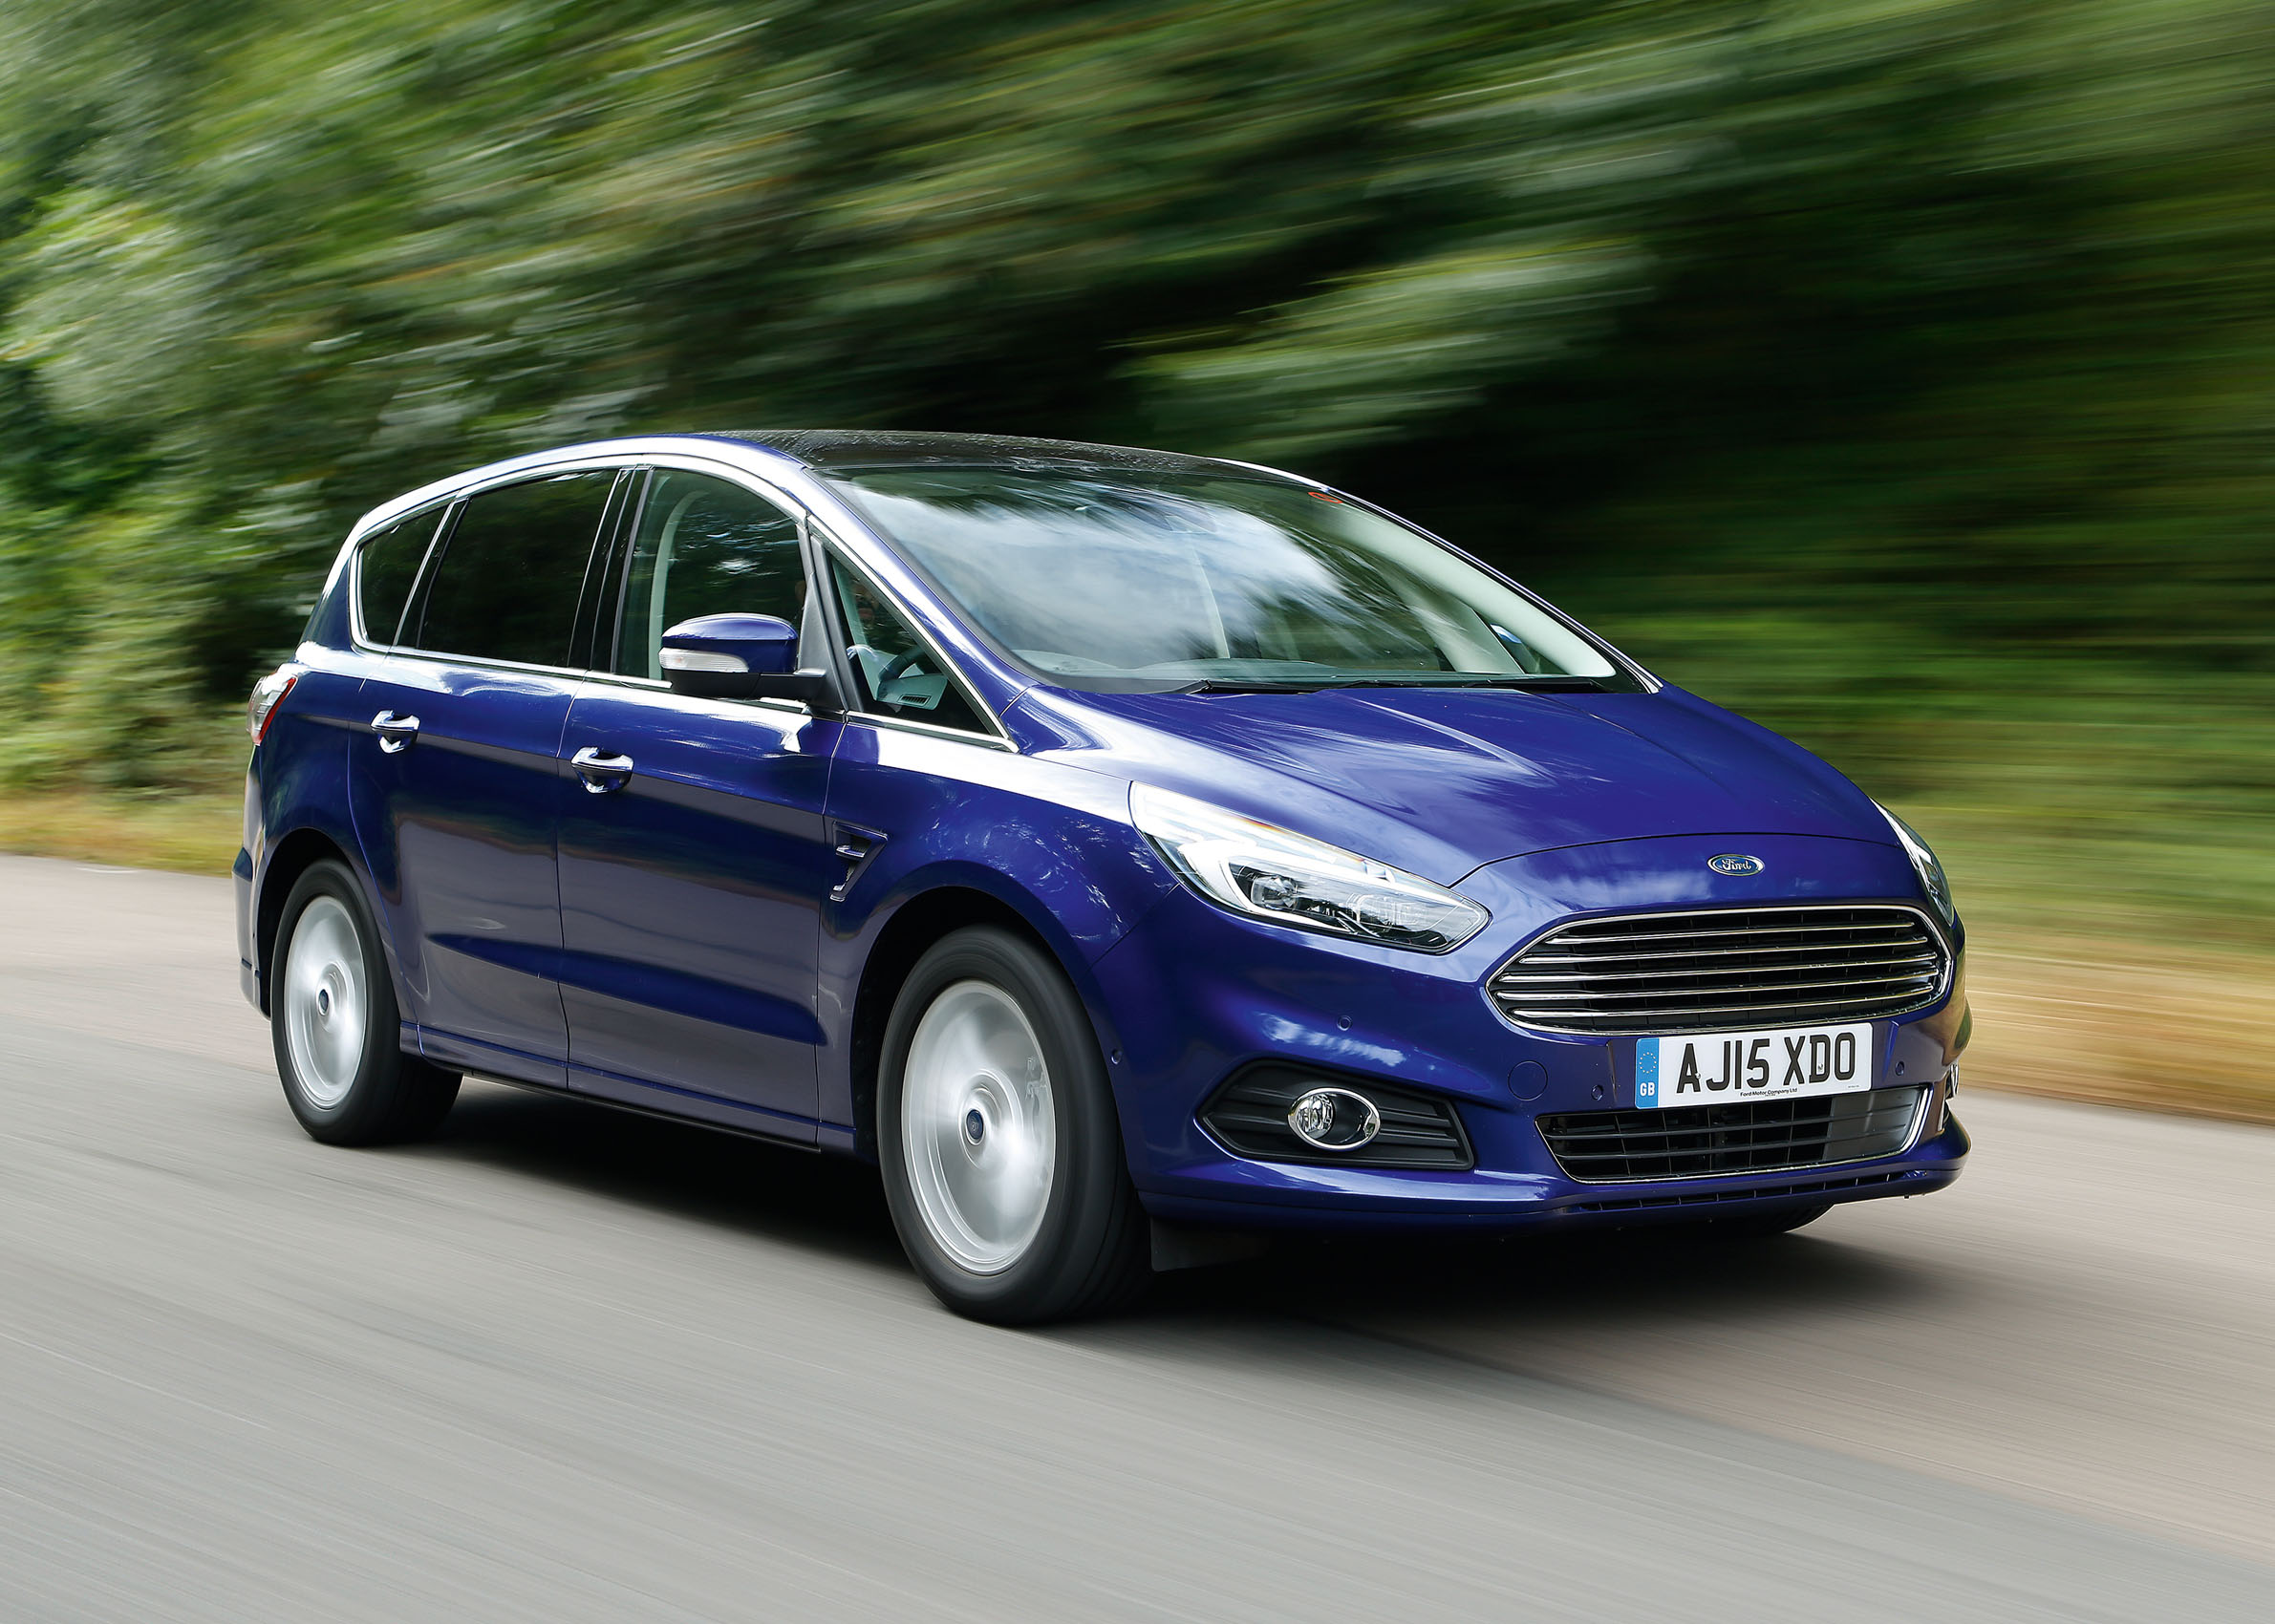 2015 Ford SMax 1.5 Ecoboost SCTi 160 Titanium UK review